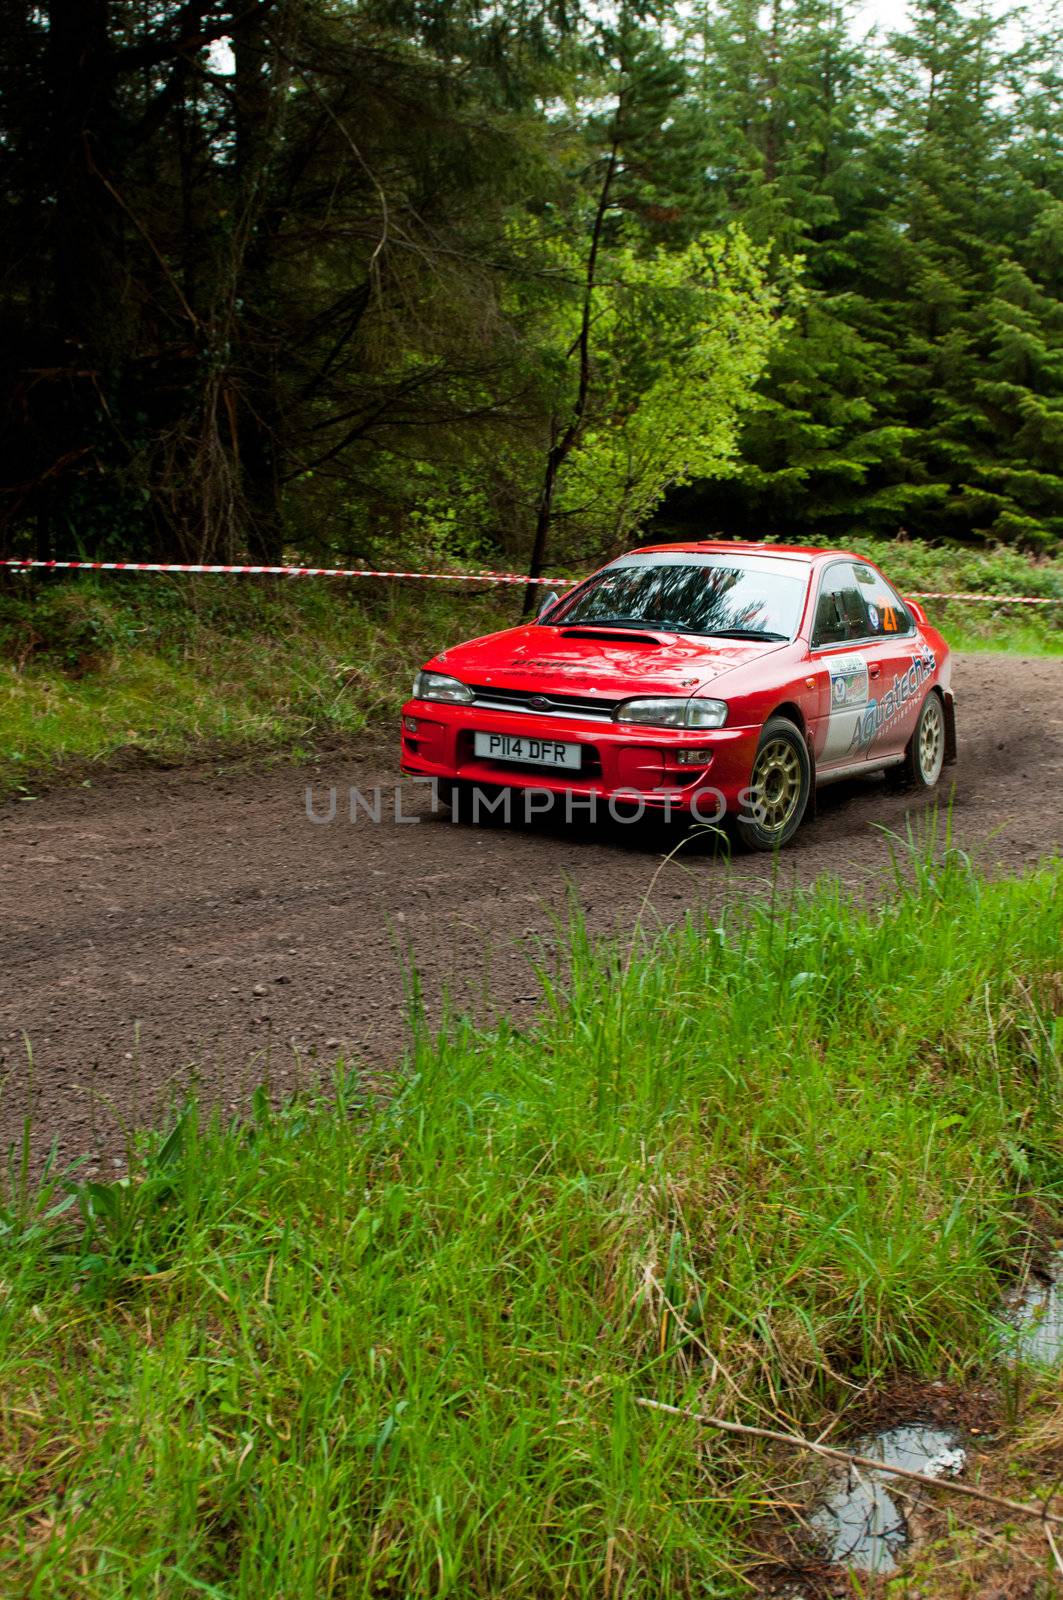 MALLOW, IRELAND - MAY 19: I. Chadwick driving Subaru Impreza at the Jim Walsh Cork Forest Rally on May 19, 2012 in Mallow, Ireland. 4th round of the Valvoline National Forest Rally Championship.